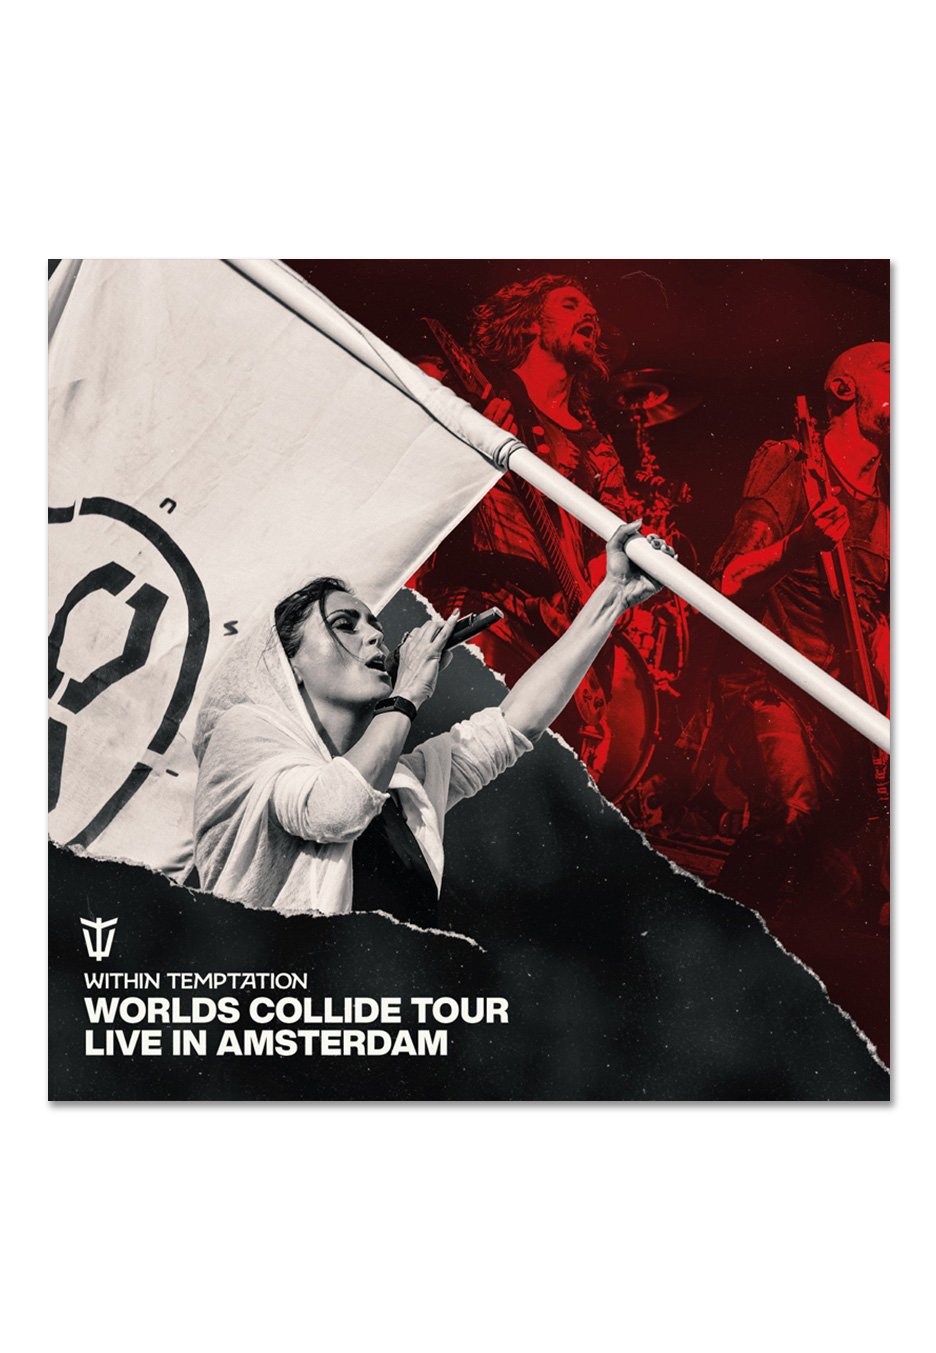 Within Temptation - Worlds Collide Tour Live In Amsterdam Ltd. White - Colored 2 Vinyl